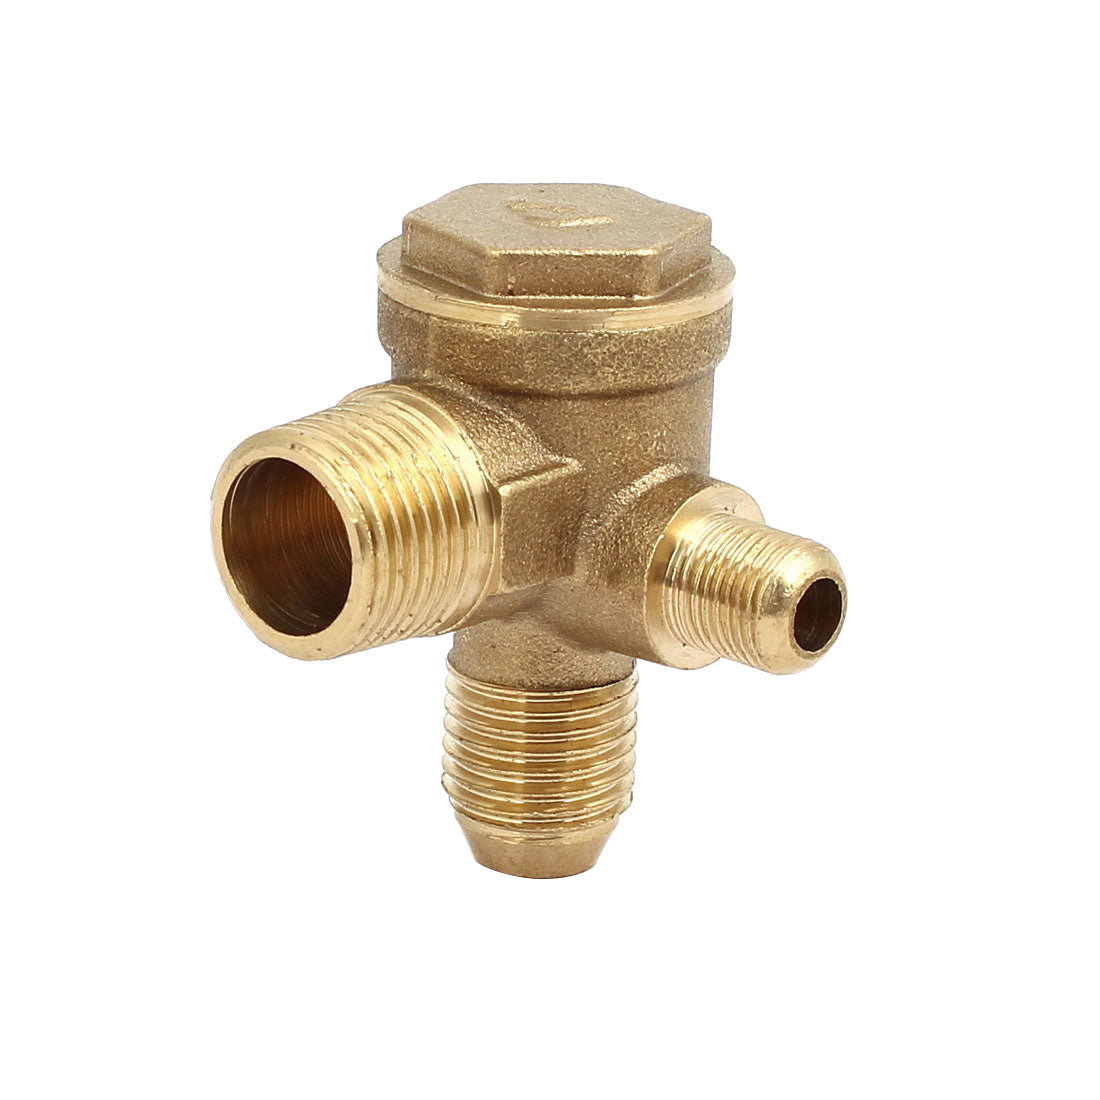 uxcell Uxcell 16mmx14mmx10mm Male Threaded Brass Air Gas Compressor Check Valve Gold Tone